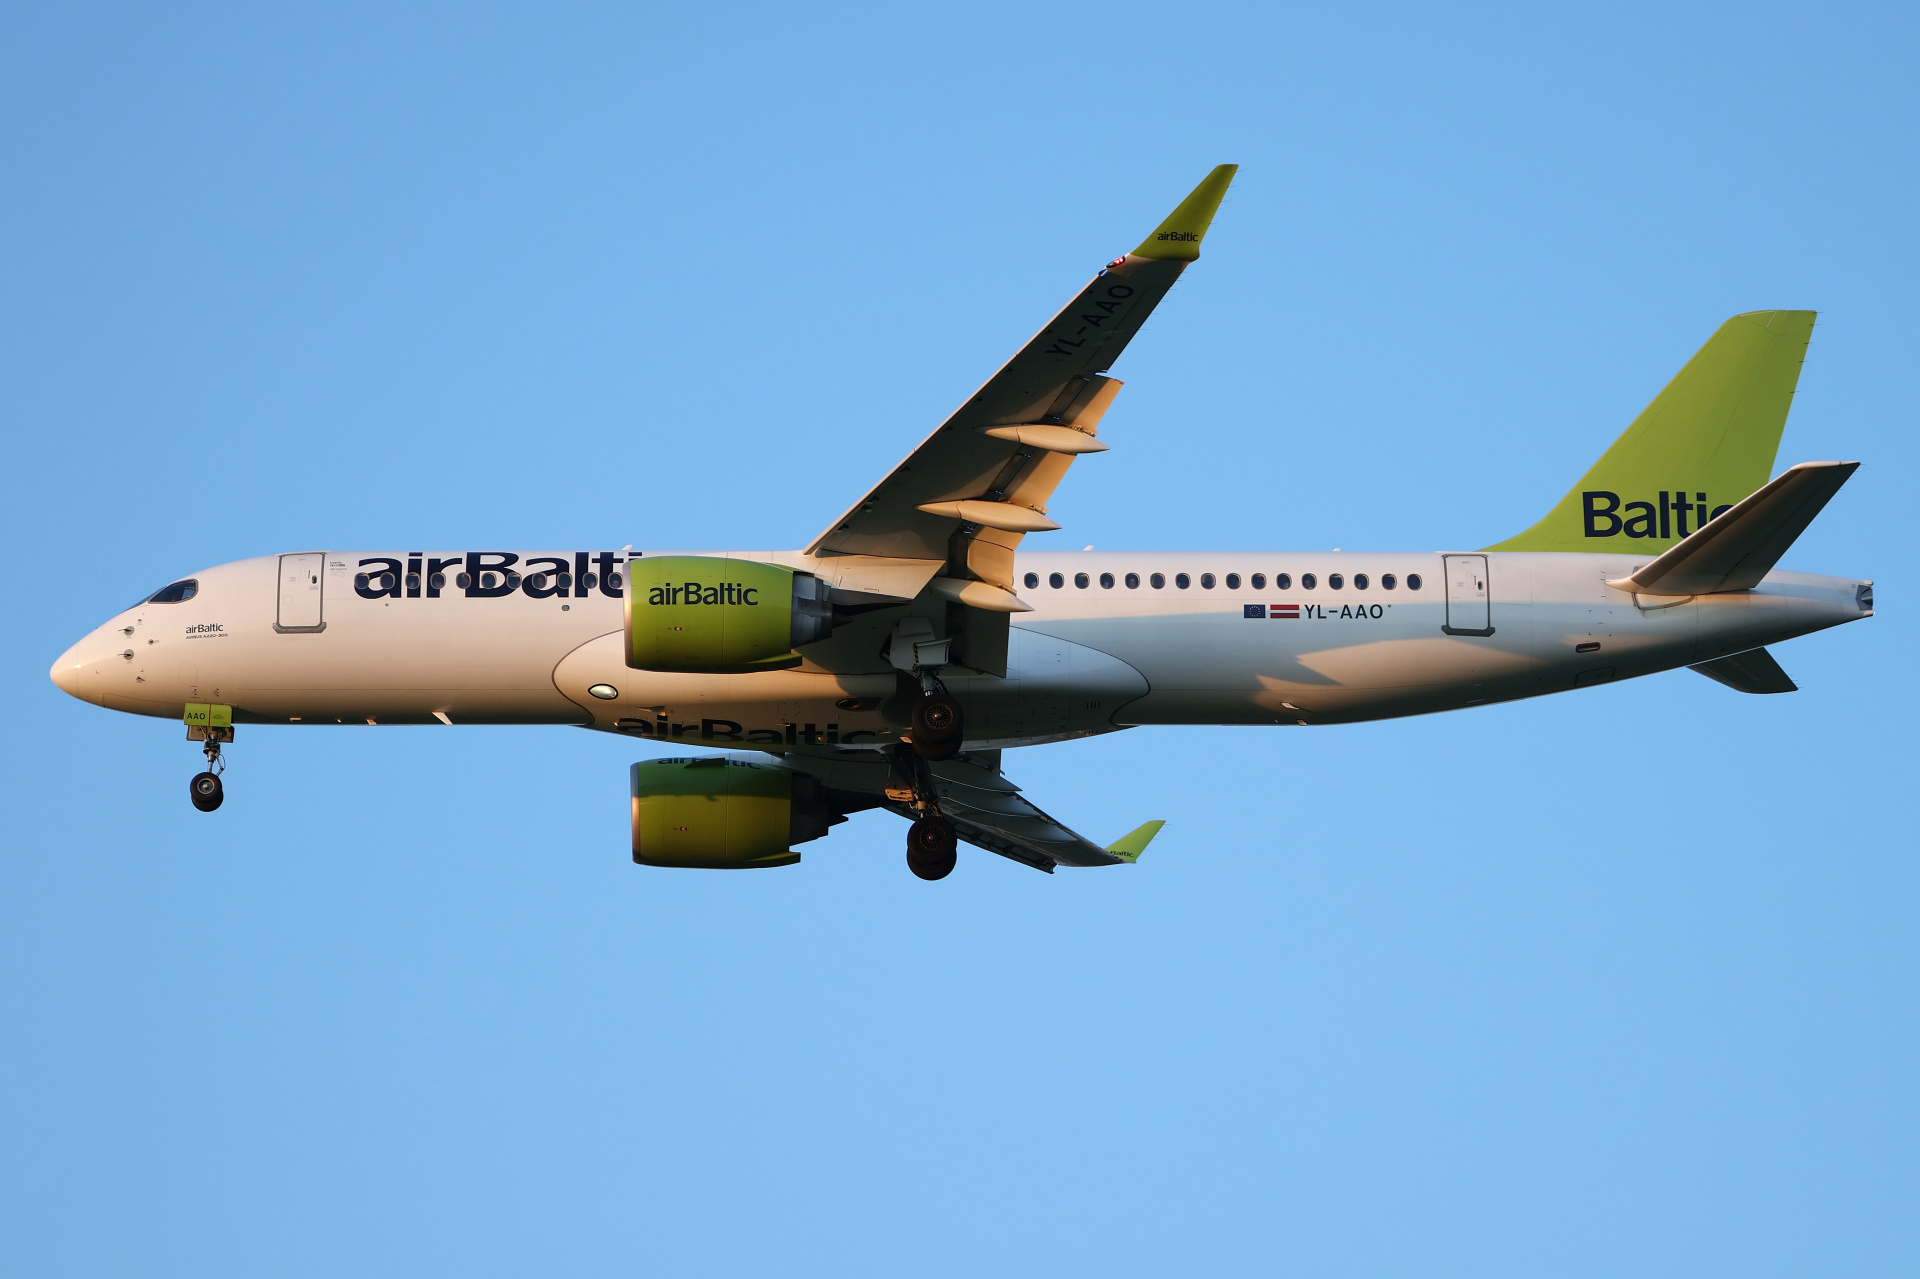 YL-AAO (Aircraft » EPWA Spotting » Airbus A220-300 » airBaltic)